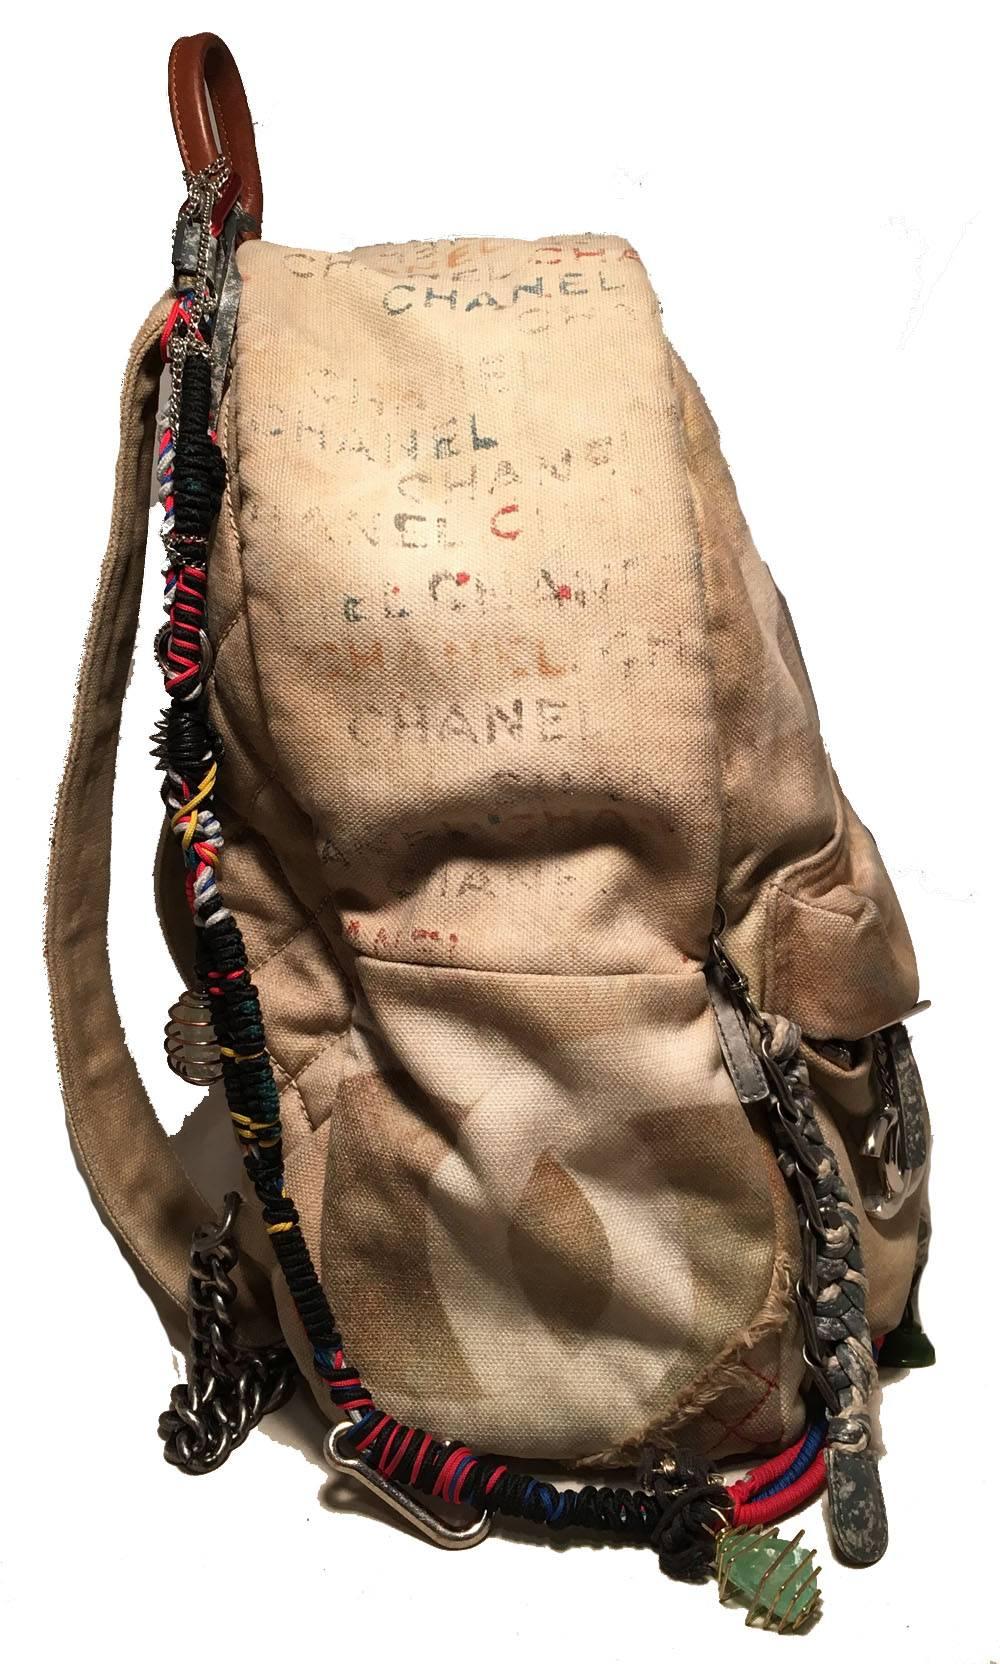 AMAZING LIMITED EDITION Chanel large canvas graffiti art school backpack in very good condition. Beige canvas toile exterior featuring hand painted graffiti and stencil designs throughout. Attached sea glass and silver wire wrapped charm braided